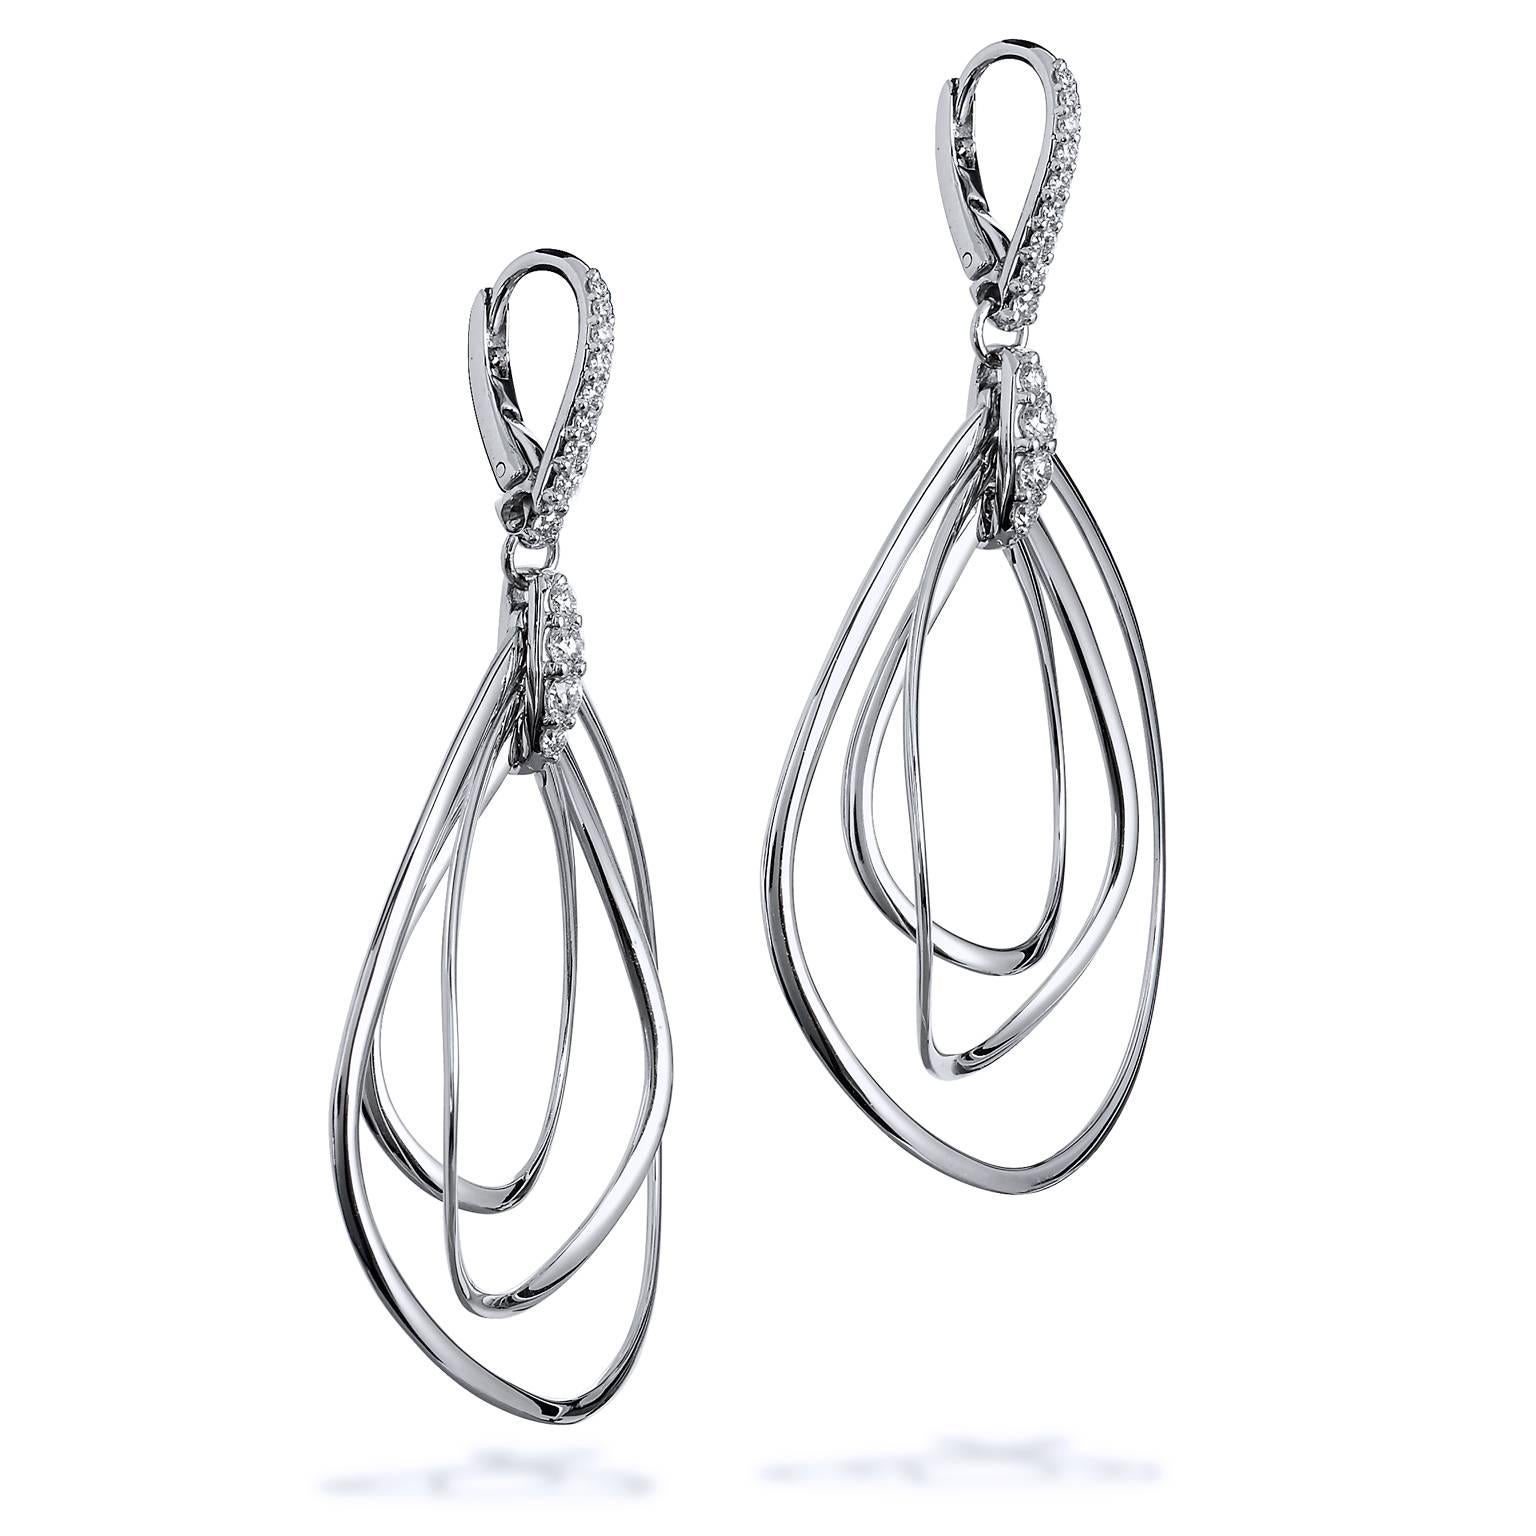 18 karat white gold drop earrings featuring a total weight of 0.62 carat of diamond pave set (G/SI).